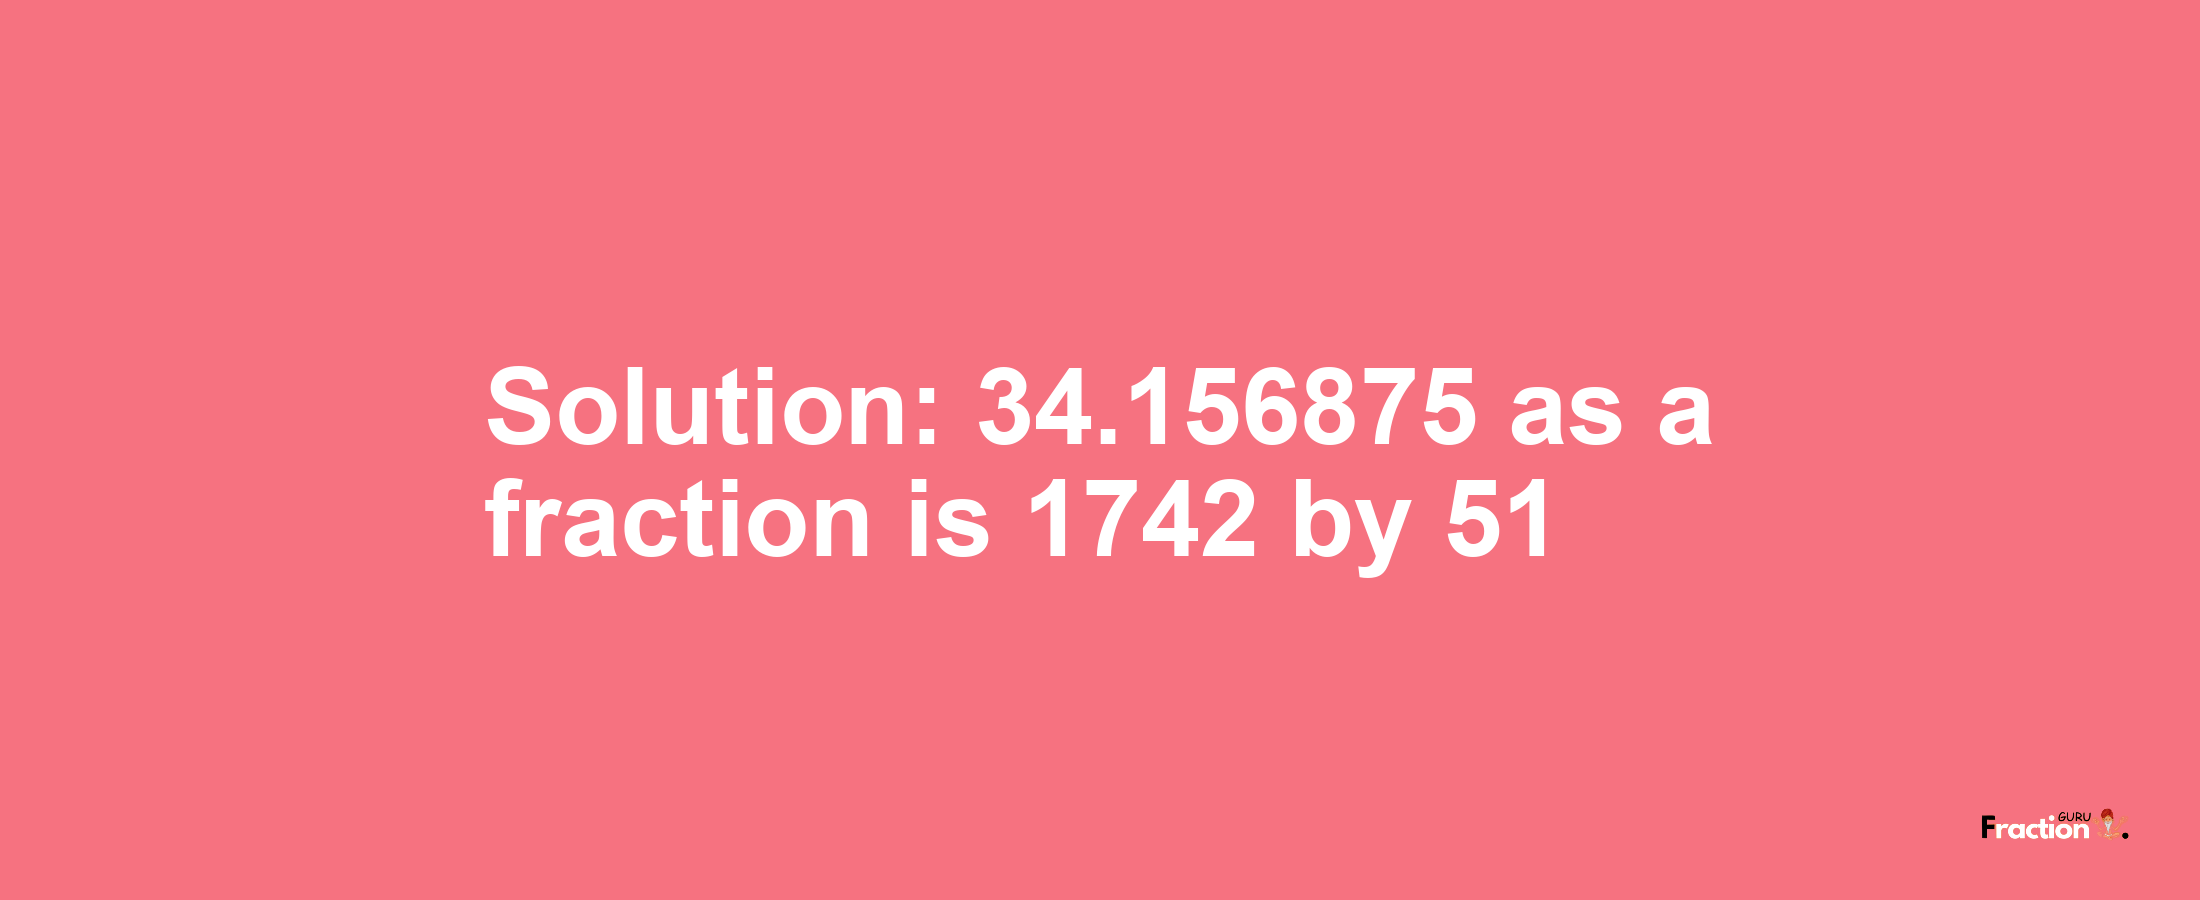 Solution:34.156875 as a fraction is 1742/51